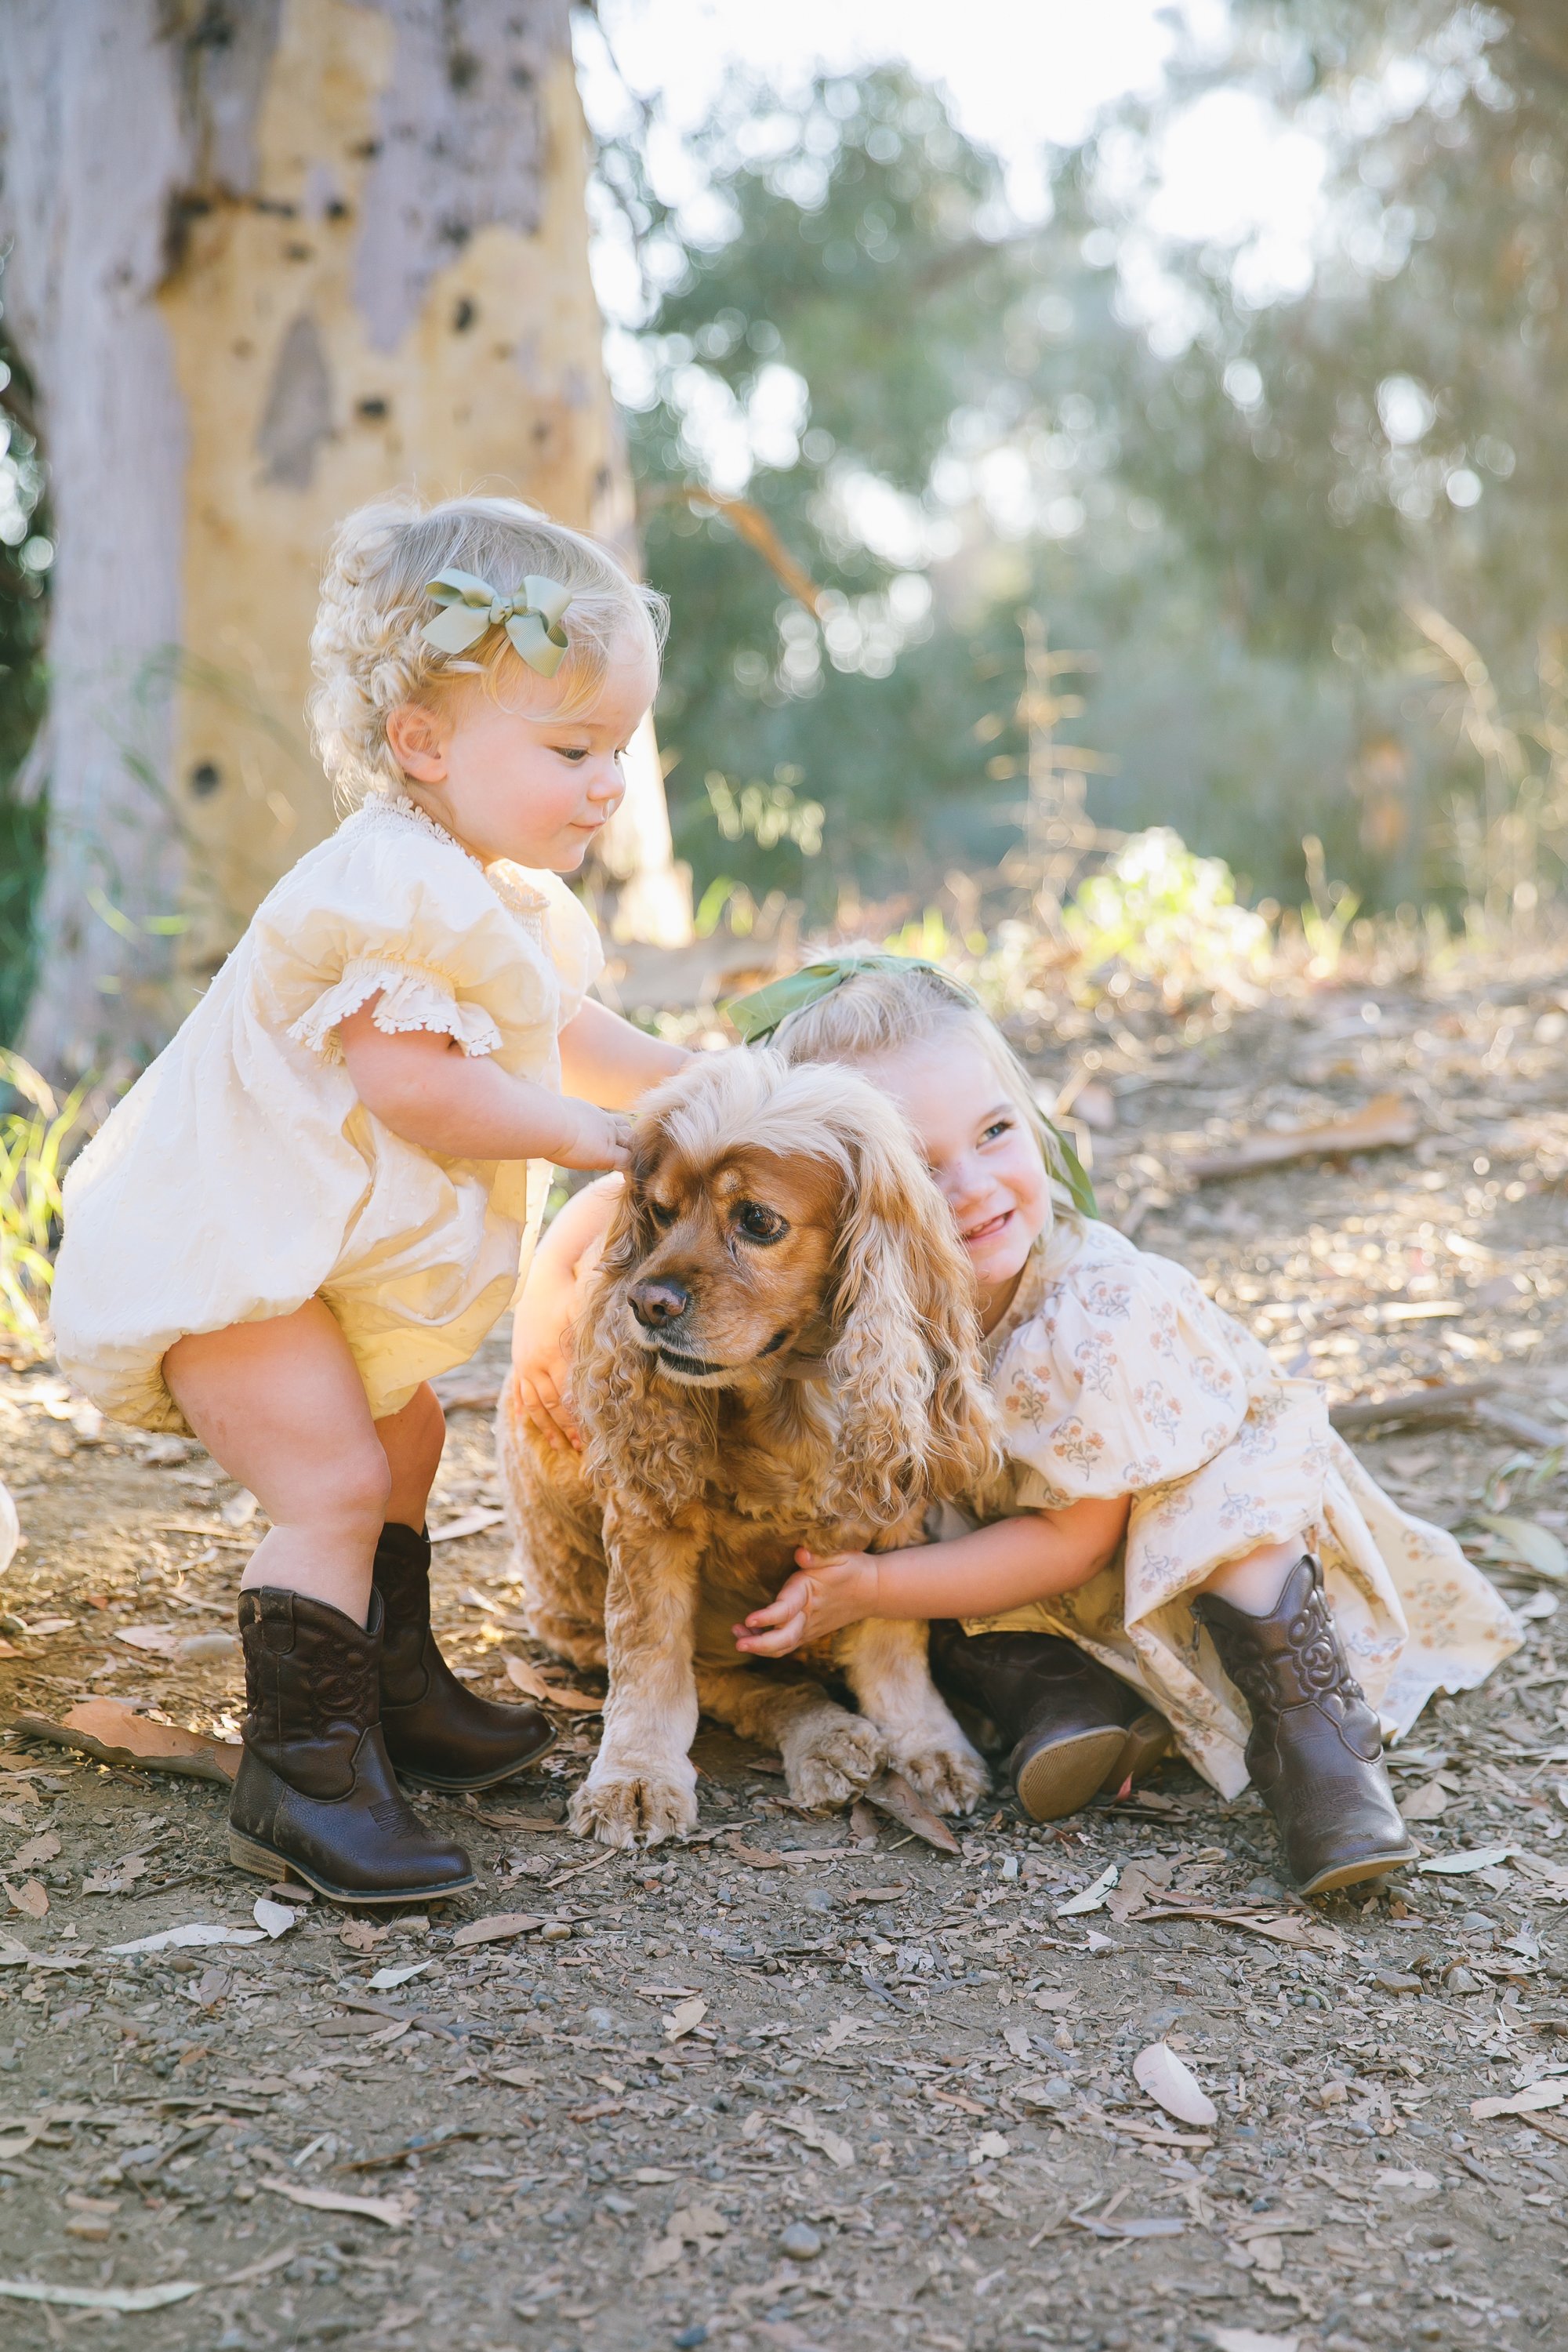 Los_Angeles_Family_Photographer_Golden_Hour_Mini_Session_Fall_Photos_Holiday_Card_Kids_Babies_Children_Luxury_Best_California_Photography-1007.jpg